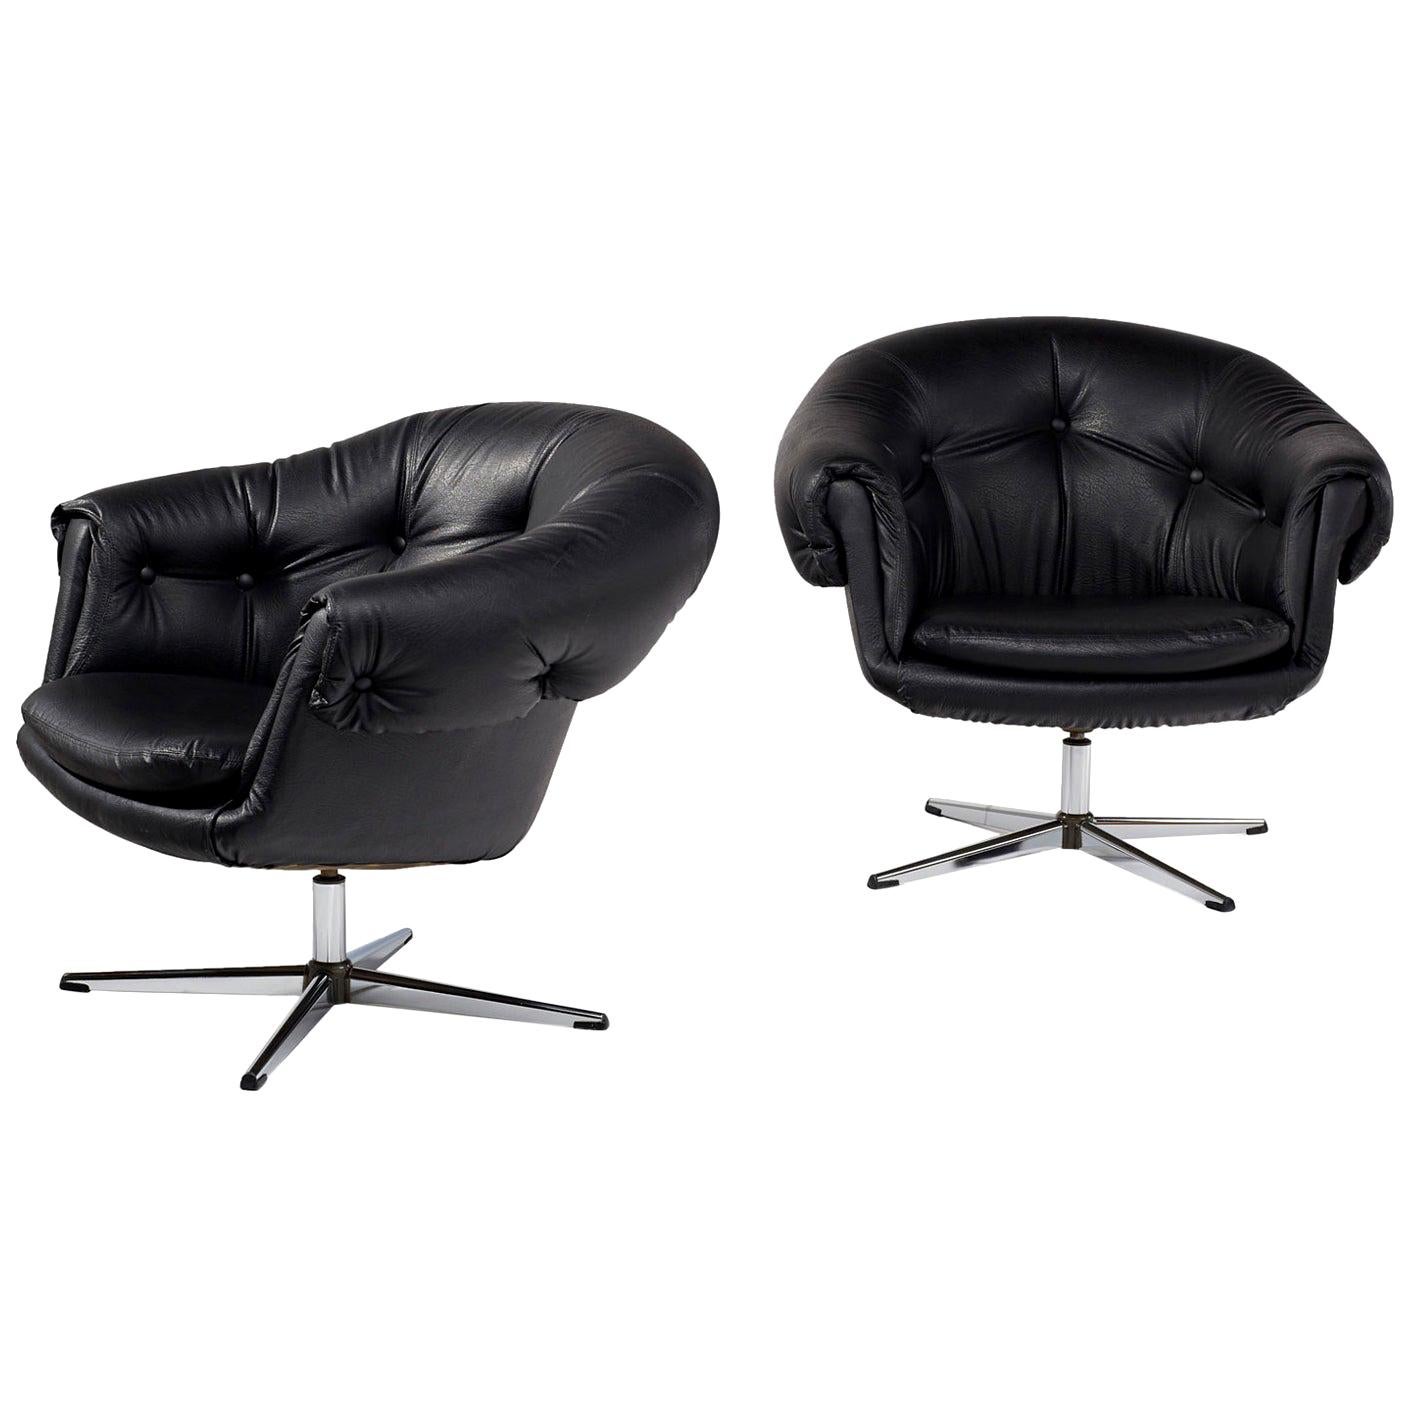 Iconic retro pod chairs in black vinyl, four-star base... similar to Swedish producer Overman. Use them as armchairs in the living room or as your desk chair. Unique button tufting give these chairs a touch of glamour. 

Vinyl and leather are in